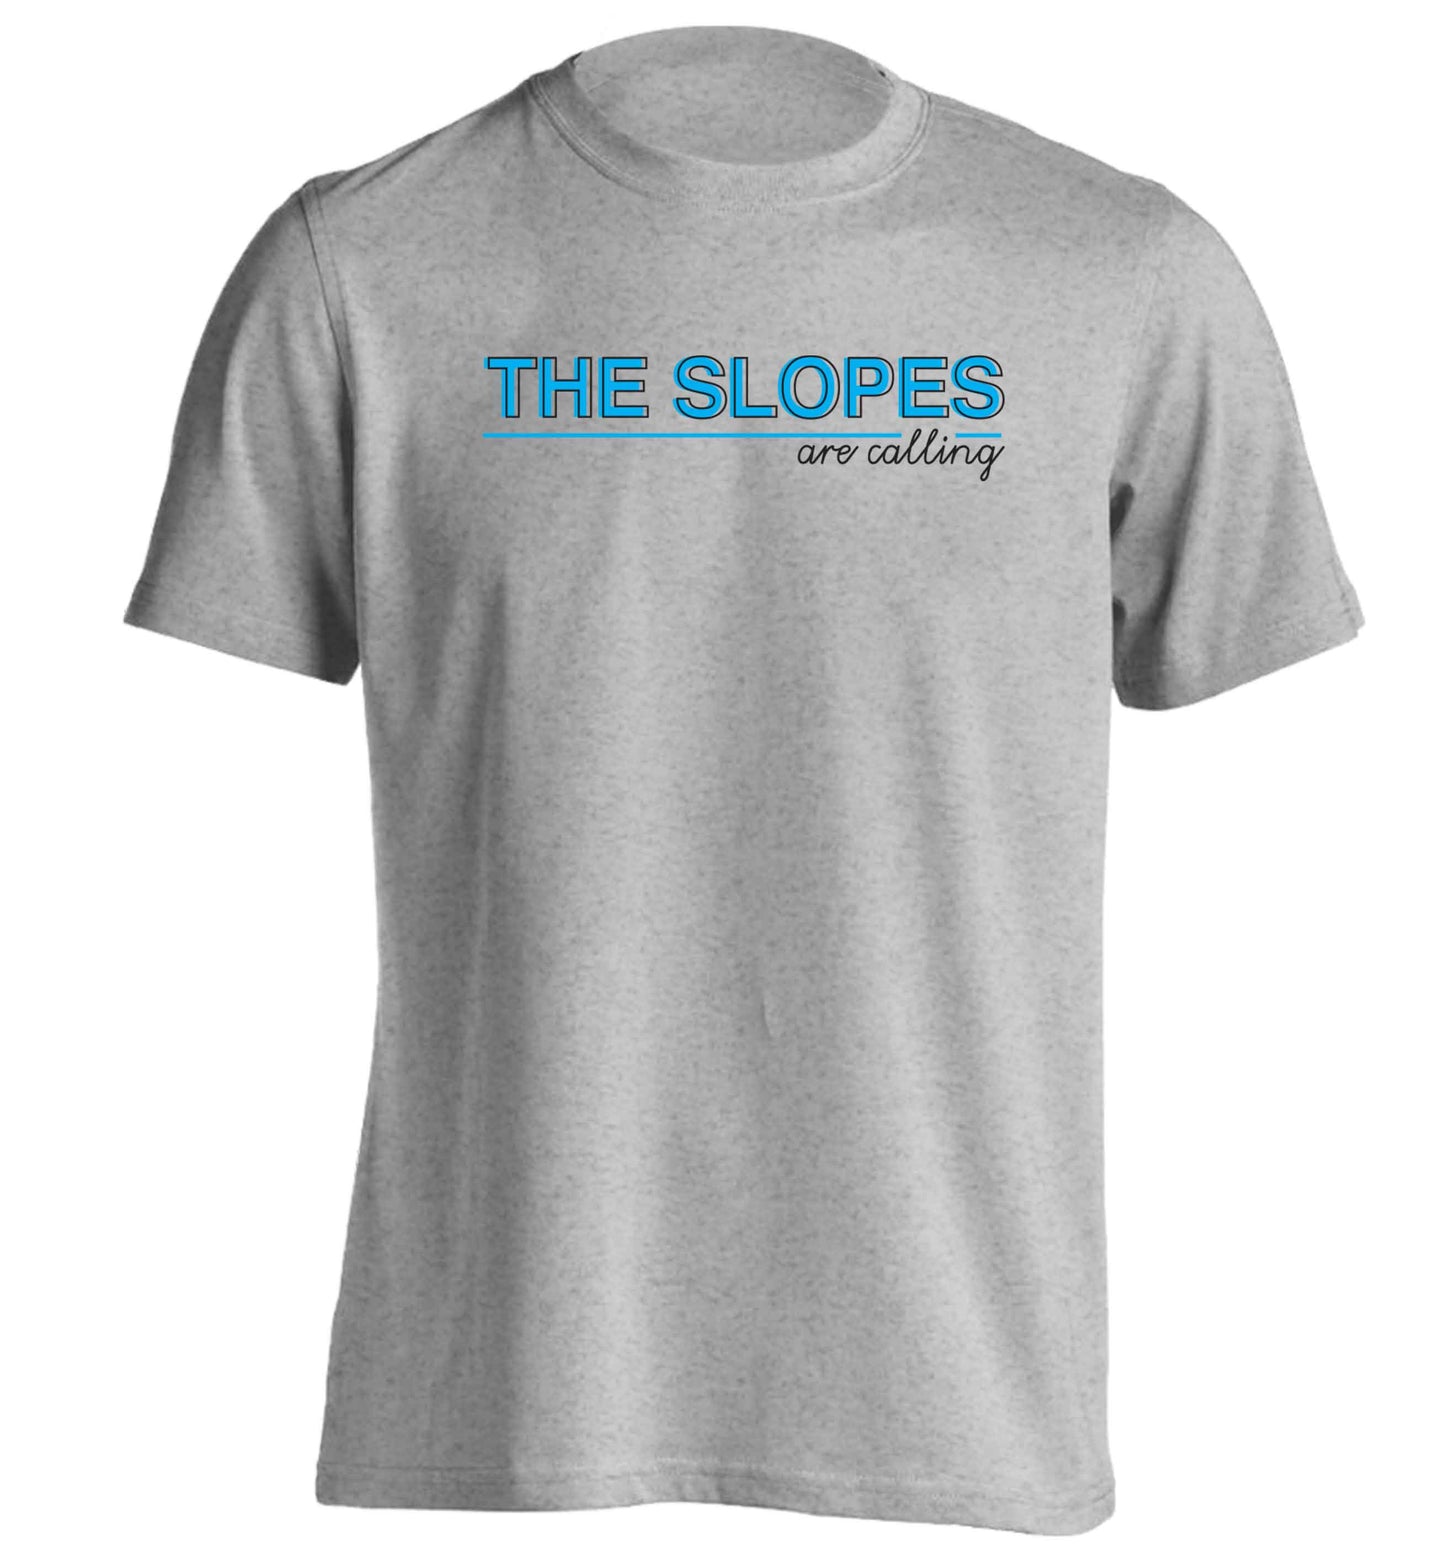 The slopes are calling adults unisex grey Tshirt 2XL